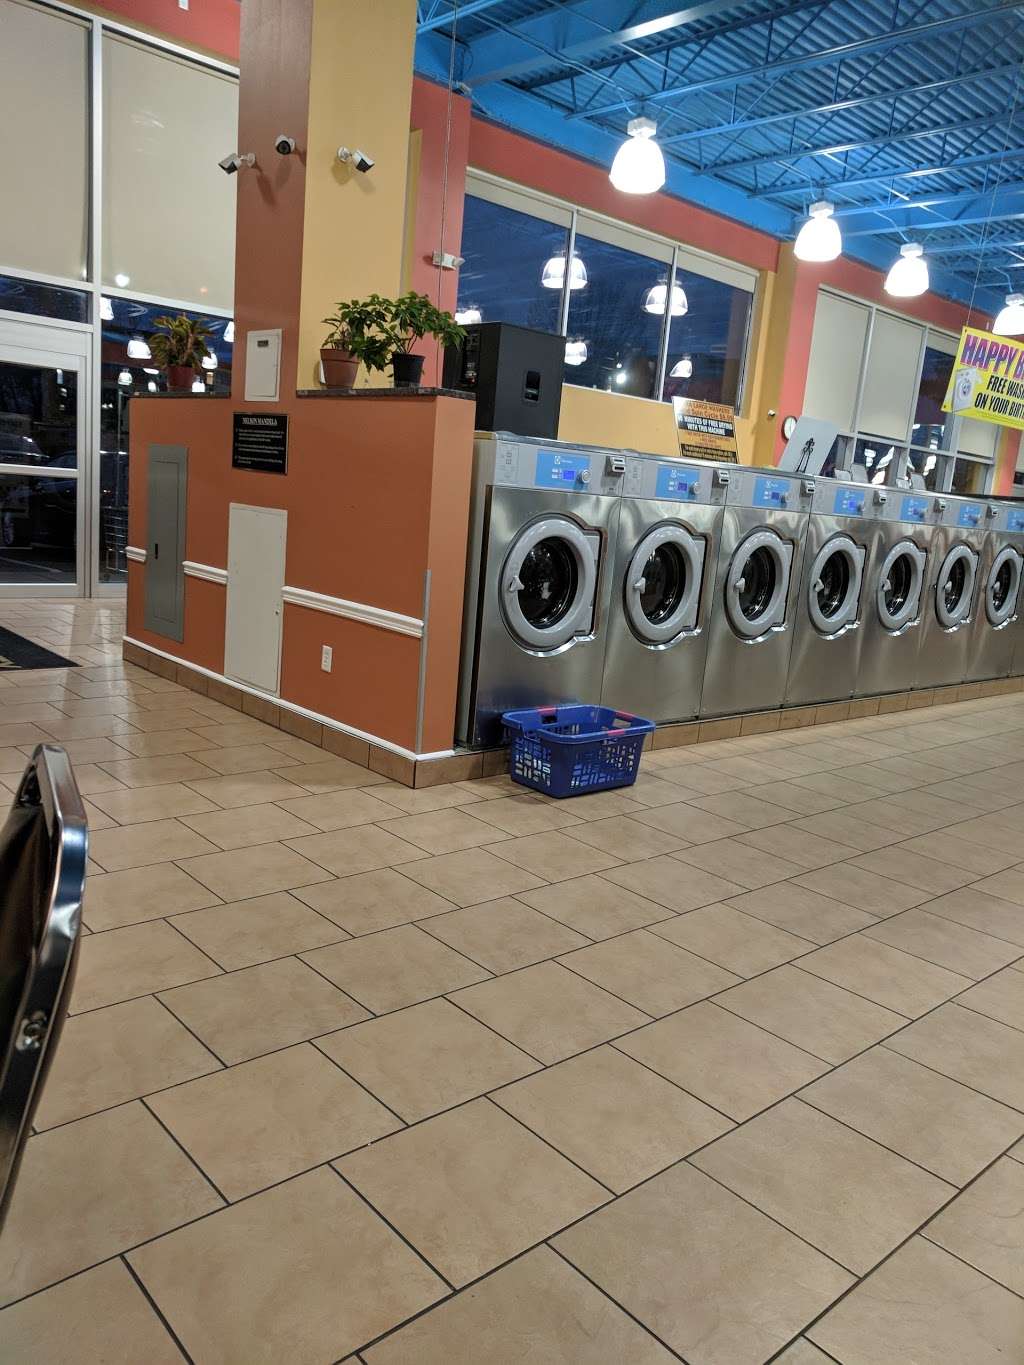 Laundry City | 5200 Moravia Rd, Baltimore, MD 21206 | Phone: (443) 627-8499